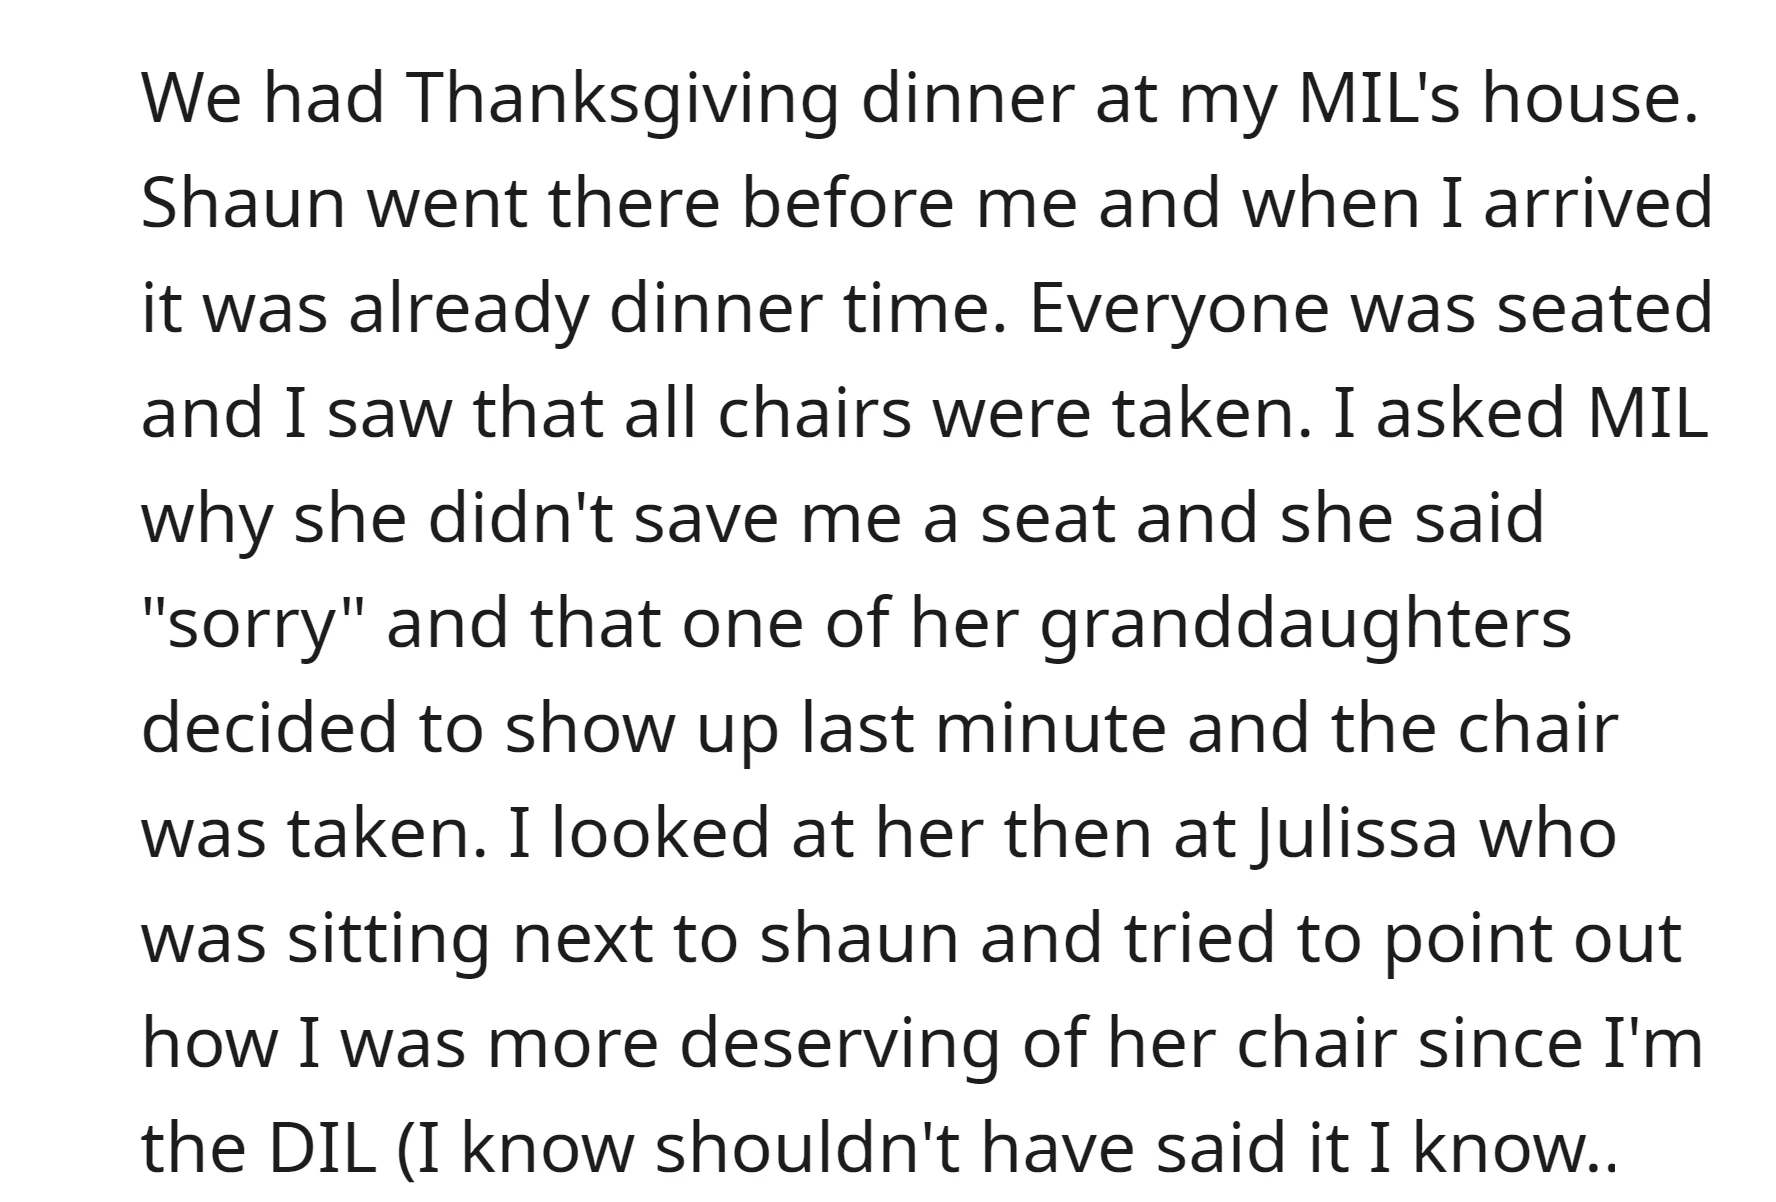 At Thanksgiving dinner, the OP's mother-in-law didn't save her a seat